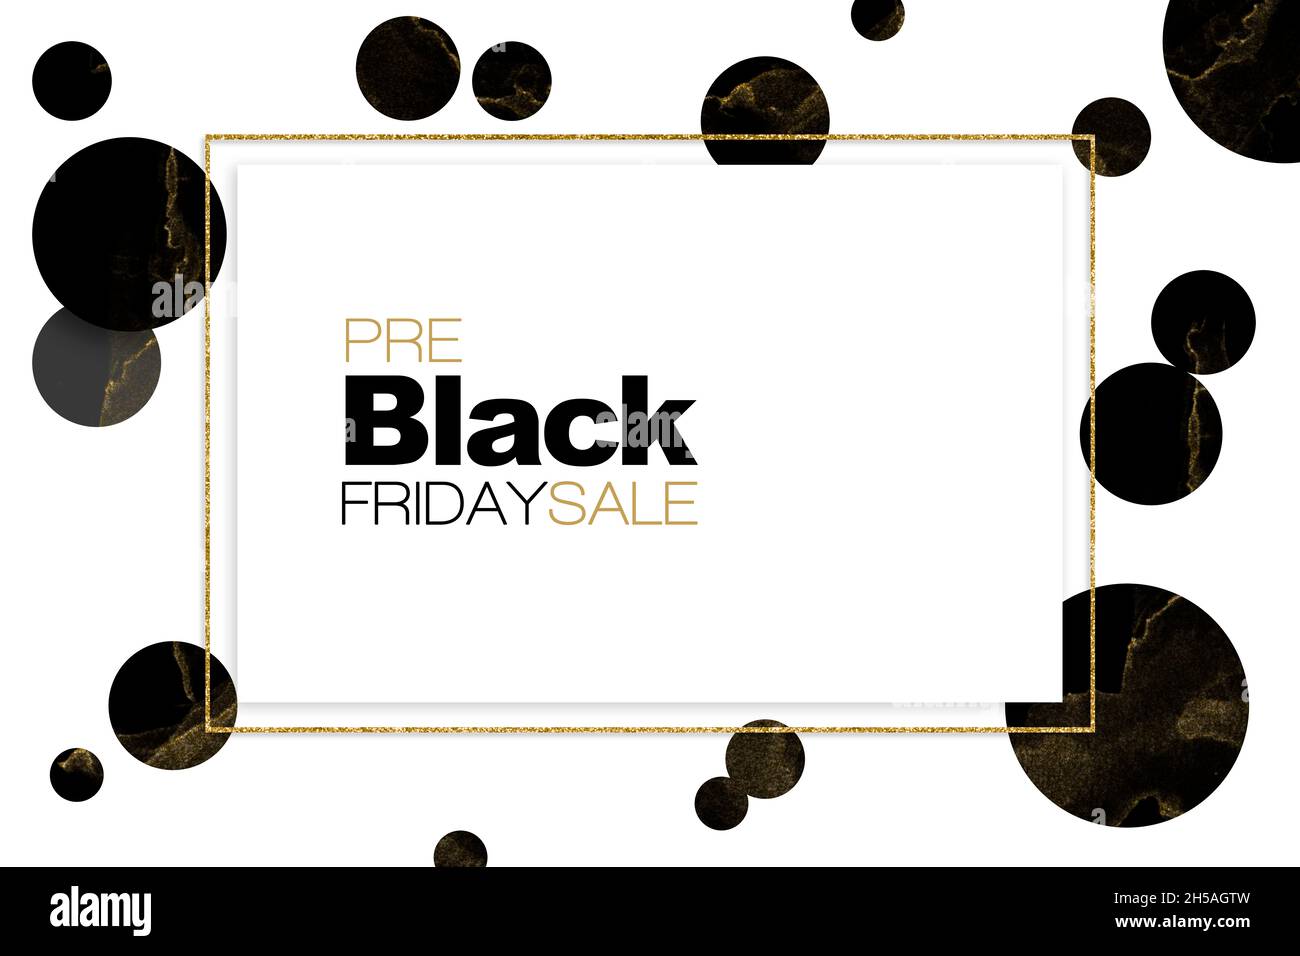 Pre Black Friday sale poster or card design with gold glitter frame on a black and white polka dot background. Business advertising, flyer, card, post Stock Photo